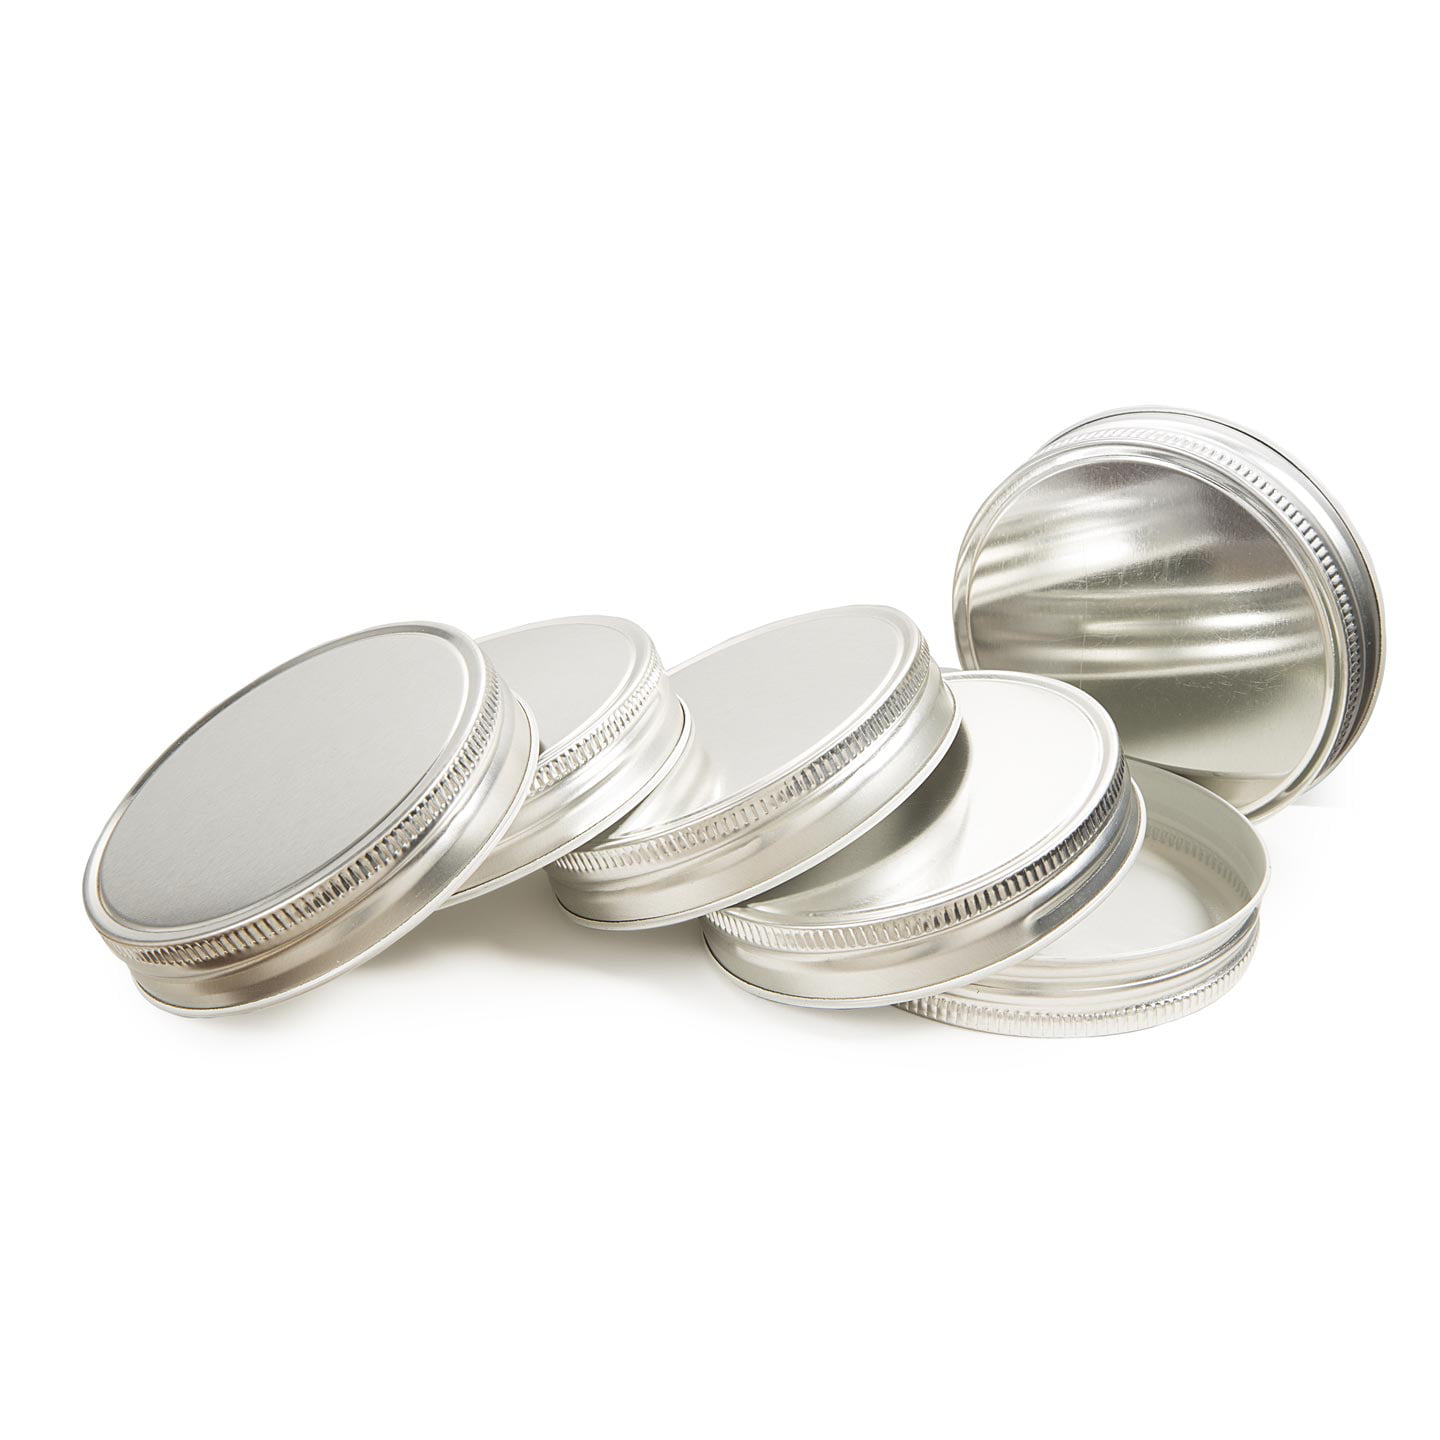 Leak Proof Metal Silver Can Lids 3.3 Inch/ 86mm Split-Type Mason Jars Covers Caps with Bands Jucoan 72 Pack Wide Mouth Canning Jar Lids and Rings 